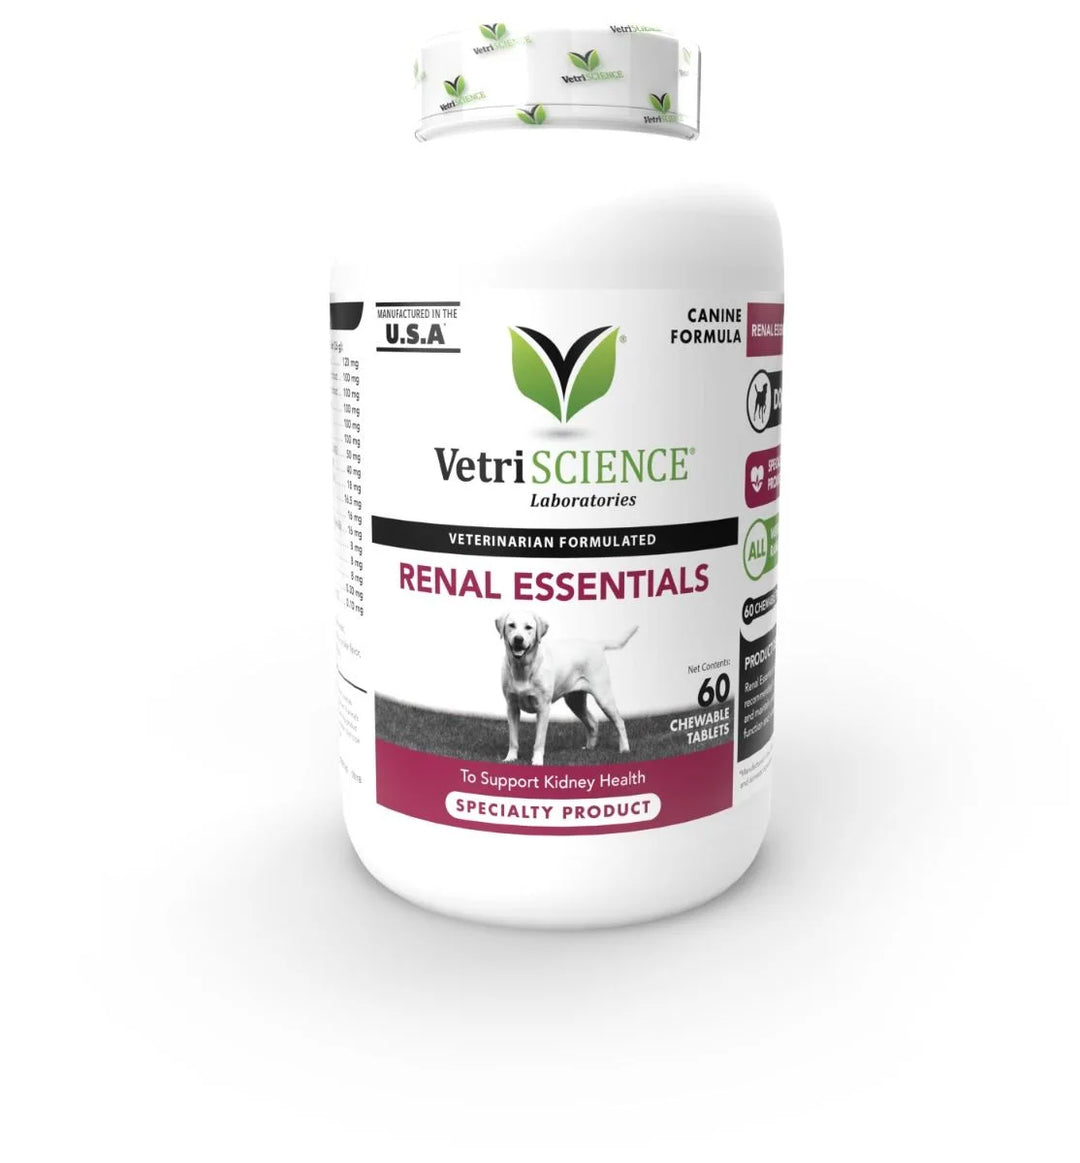 VetriScience® - Renal Essentials Kidney Supplement for Dogs (60 Chewable Tablets)